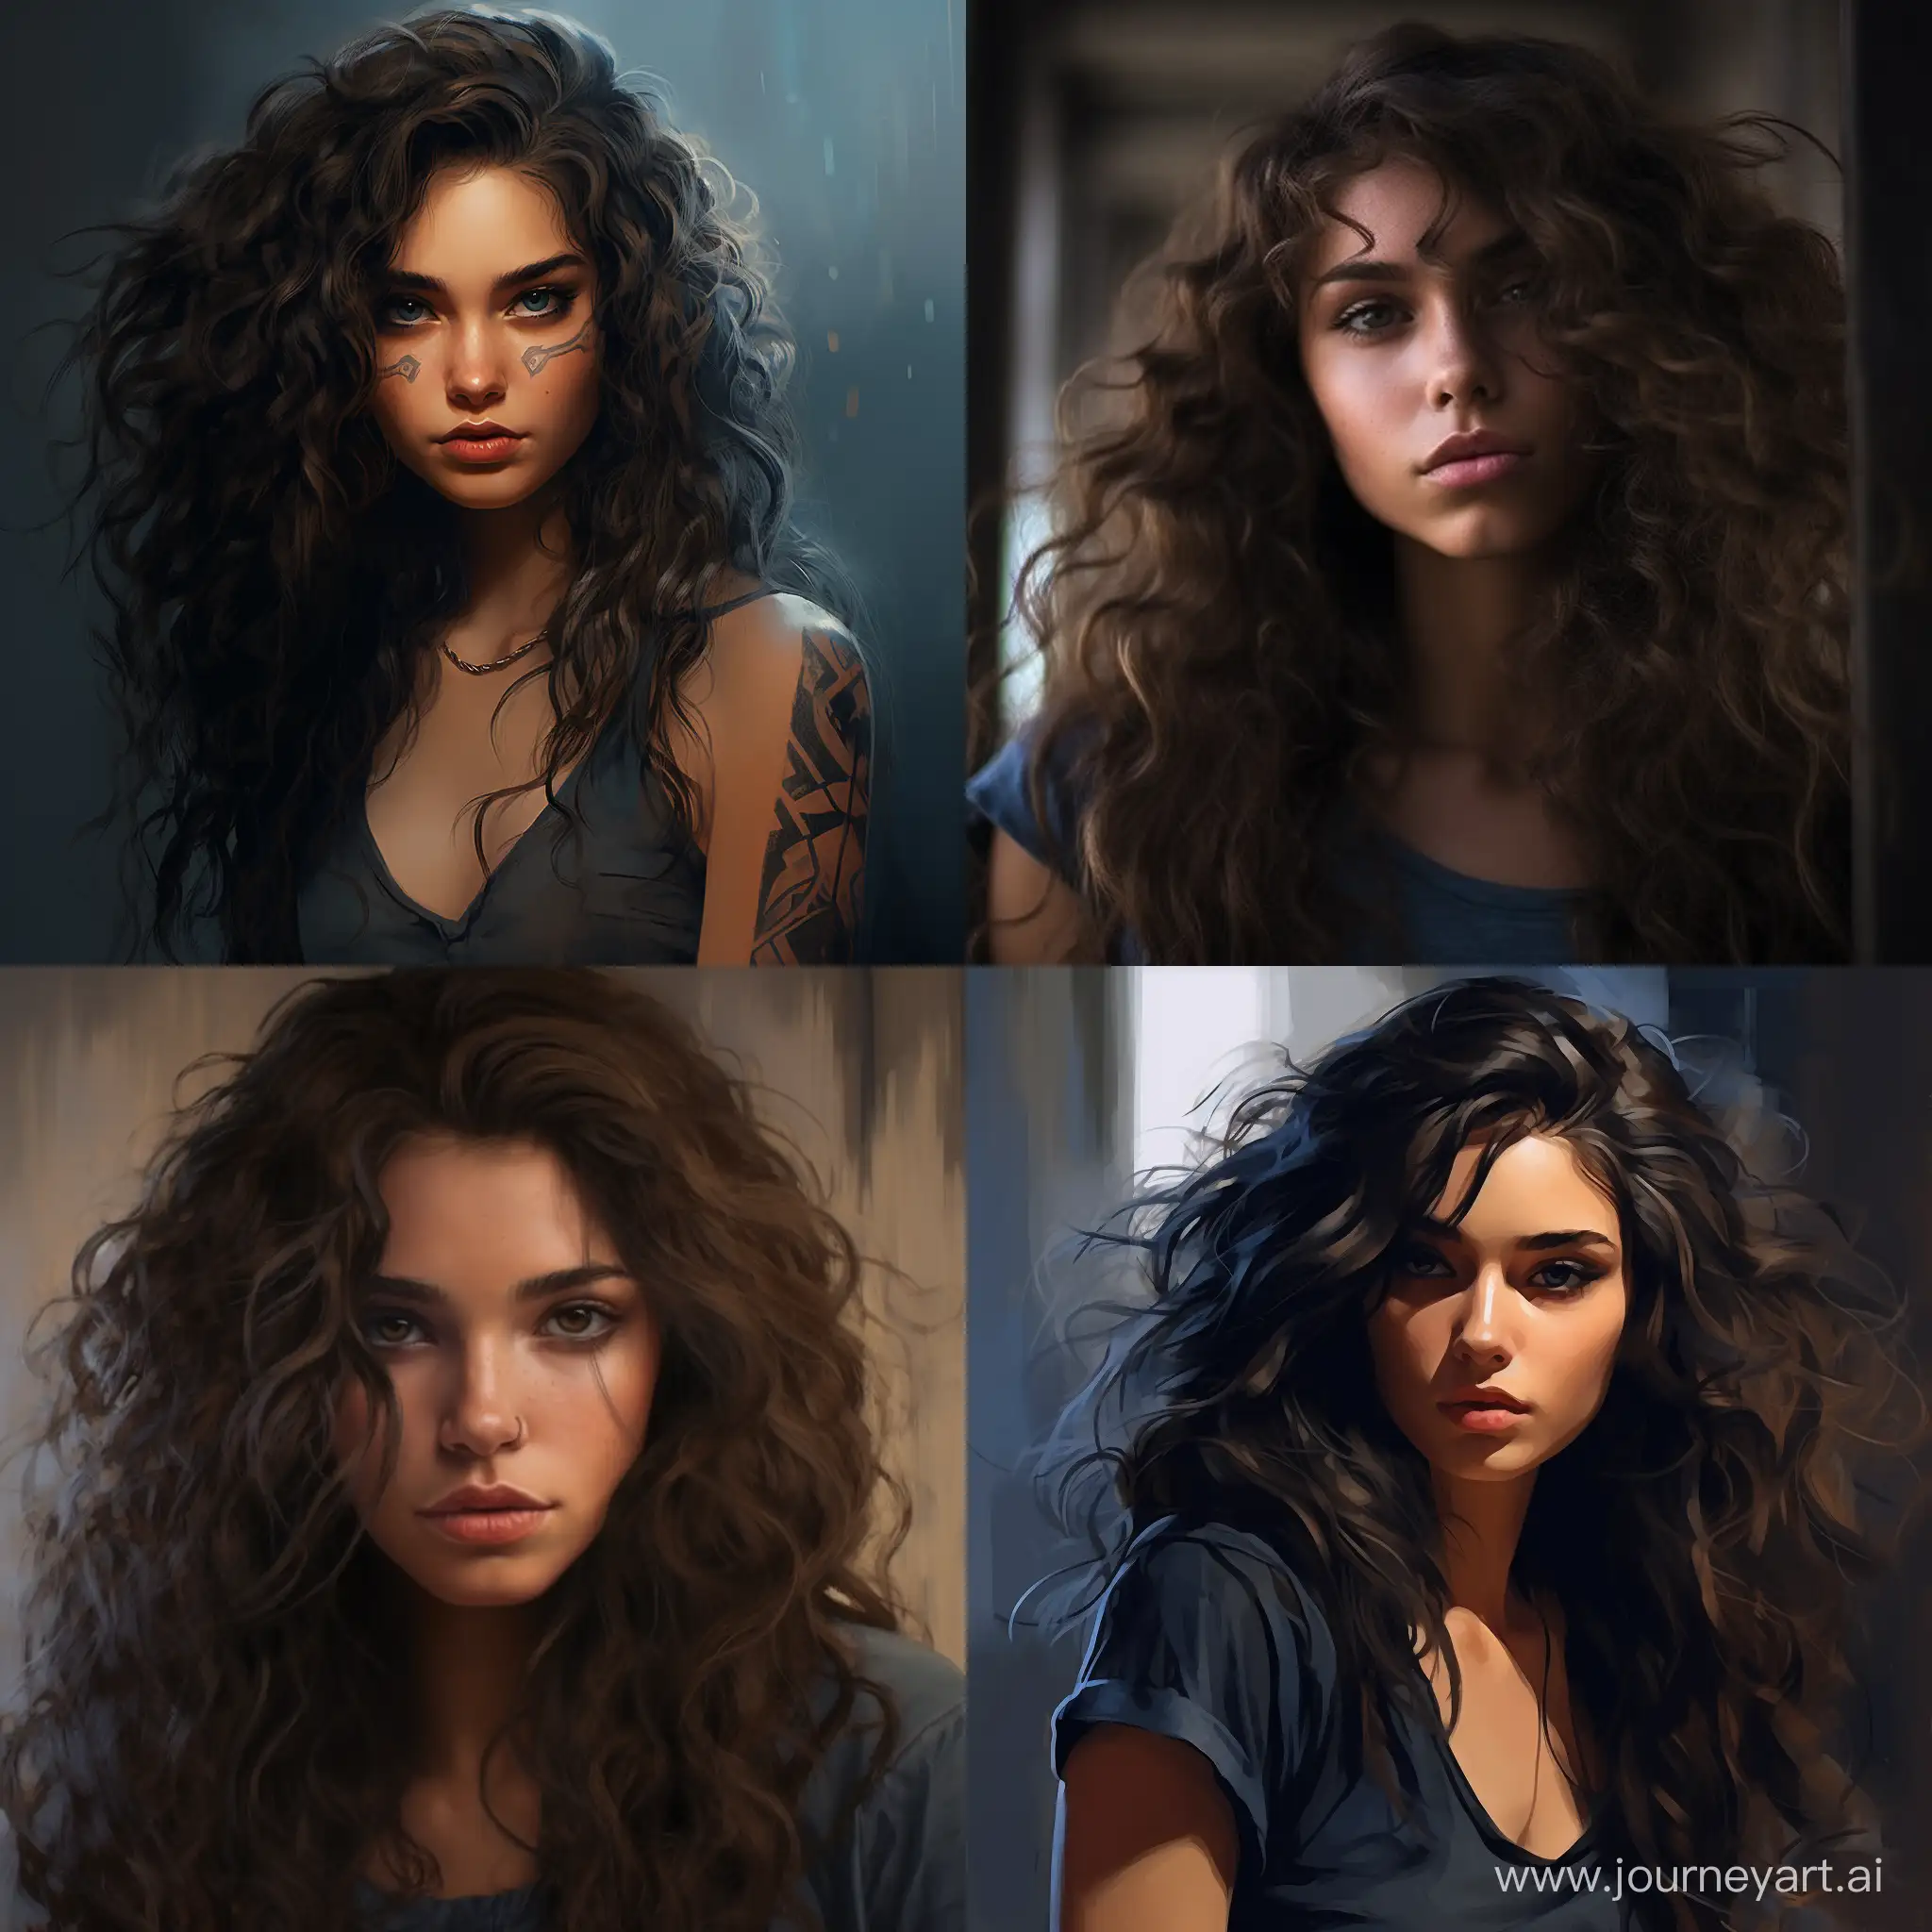 Portrait-of-a-Captivating-22YearOld-Woman-with-Curly-Dark-Brown-Hair-and-a-Distinctive-Lip-Scar